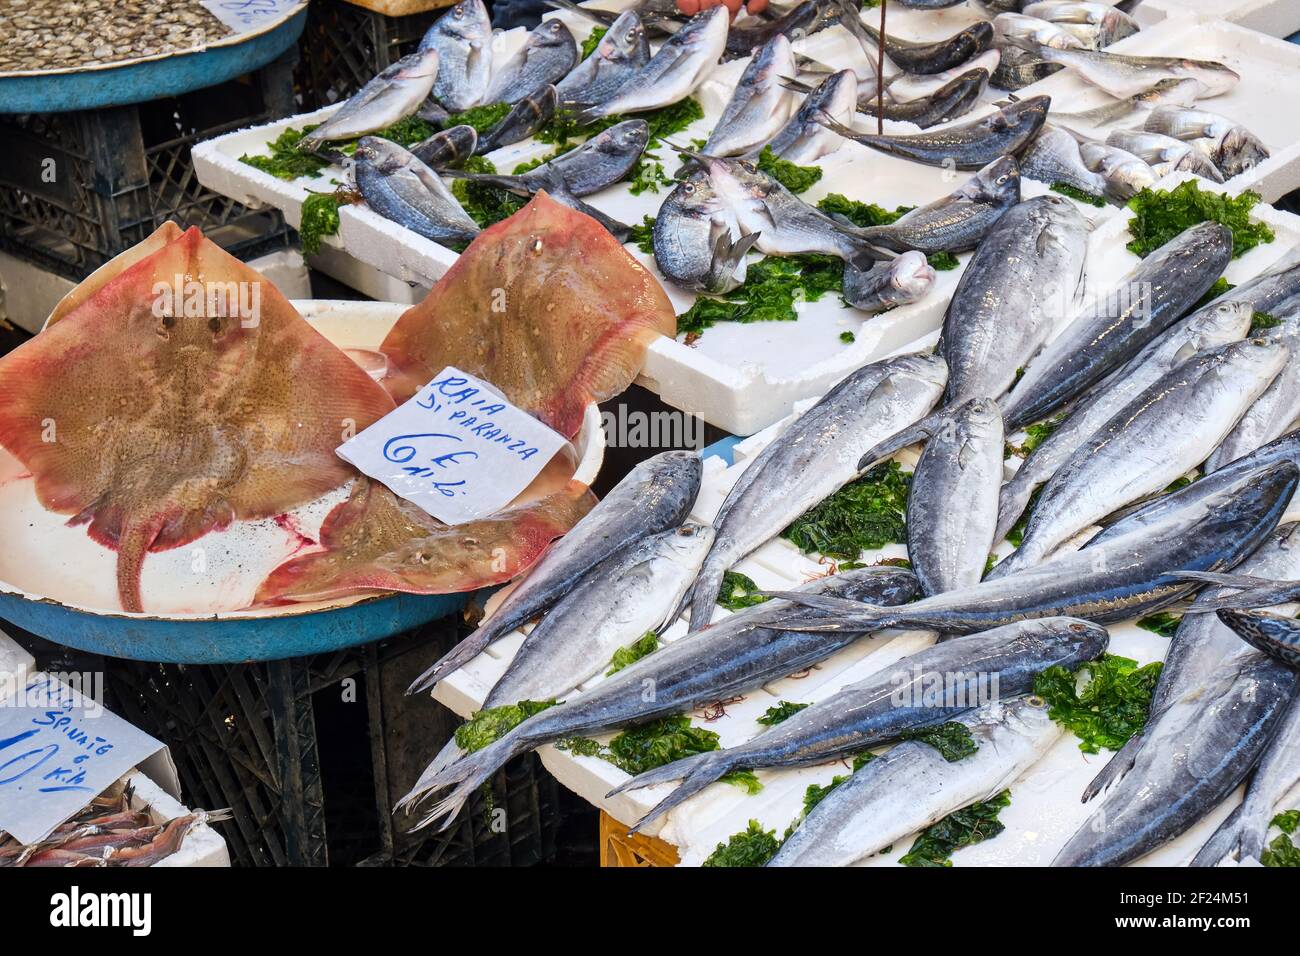 Different kinds of fish for sale at a market Stock Photo